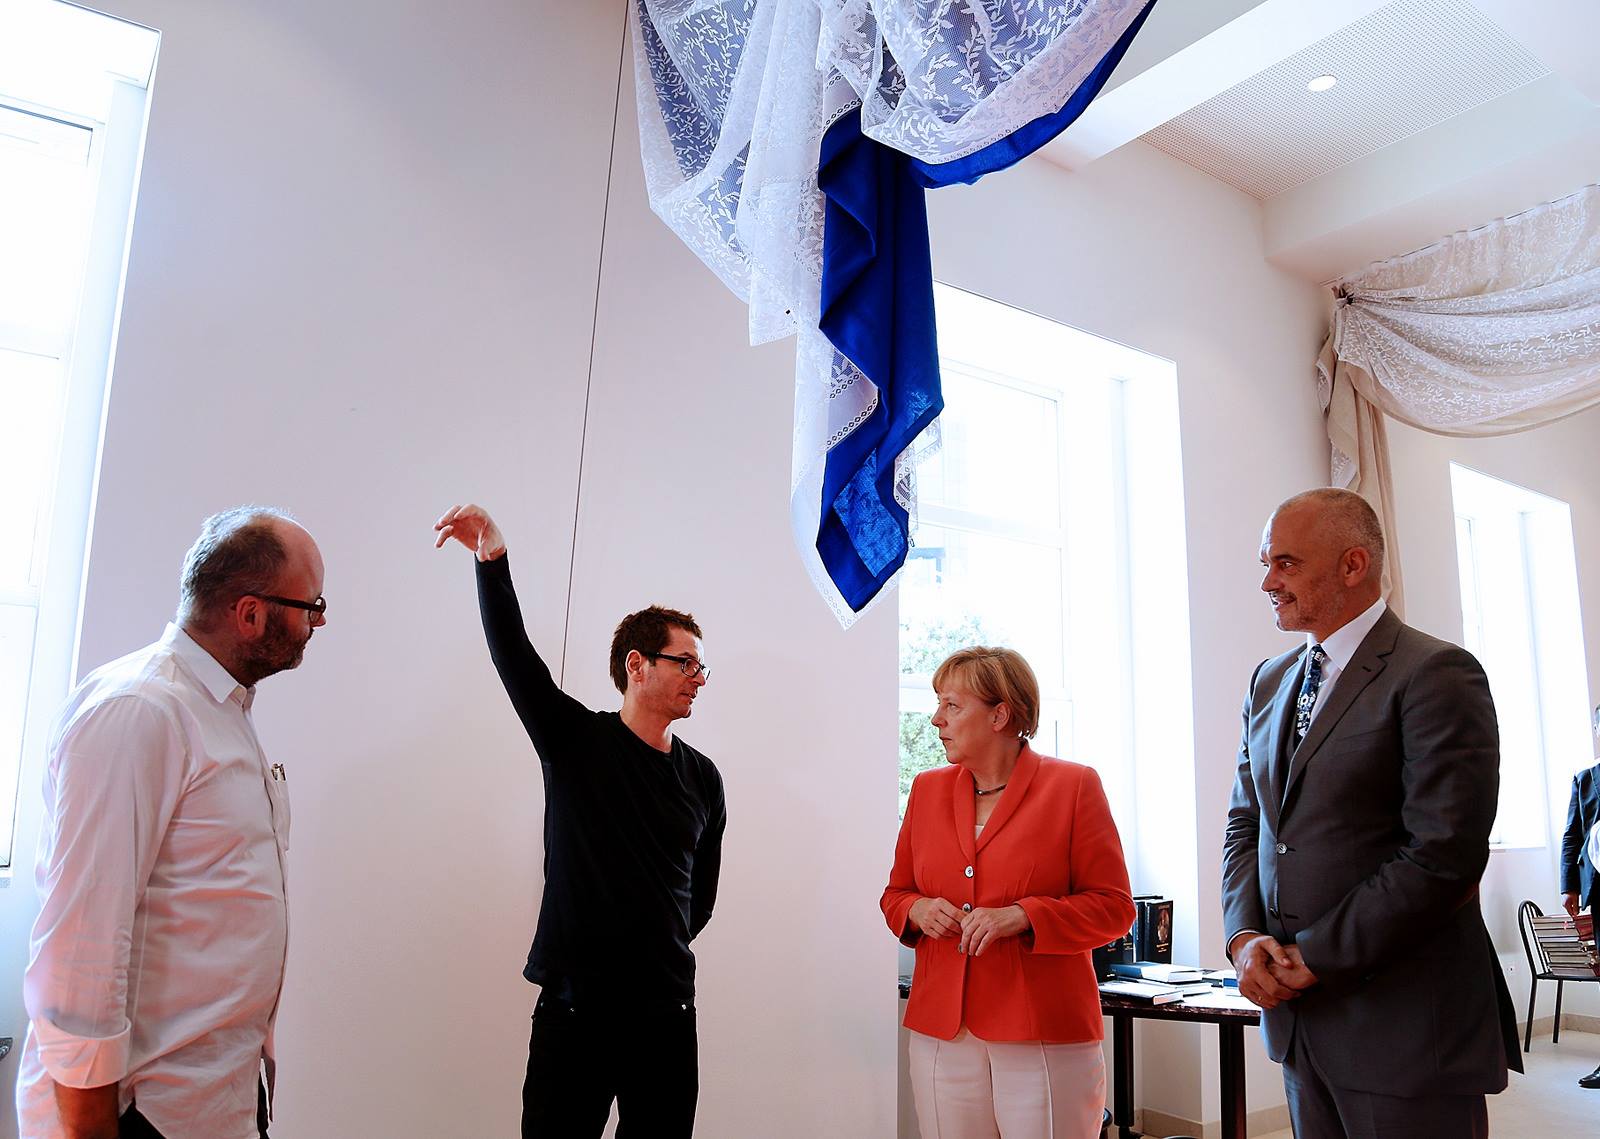 A woman and three men stand and talk in a white room with lace curtains hanging above